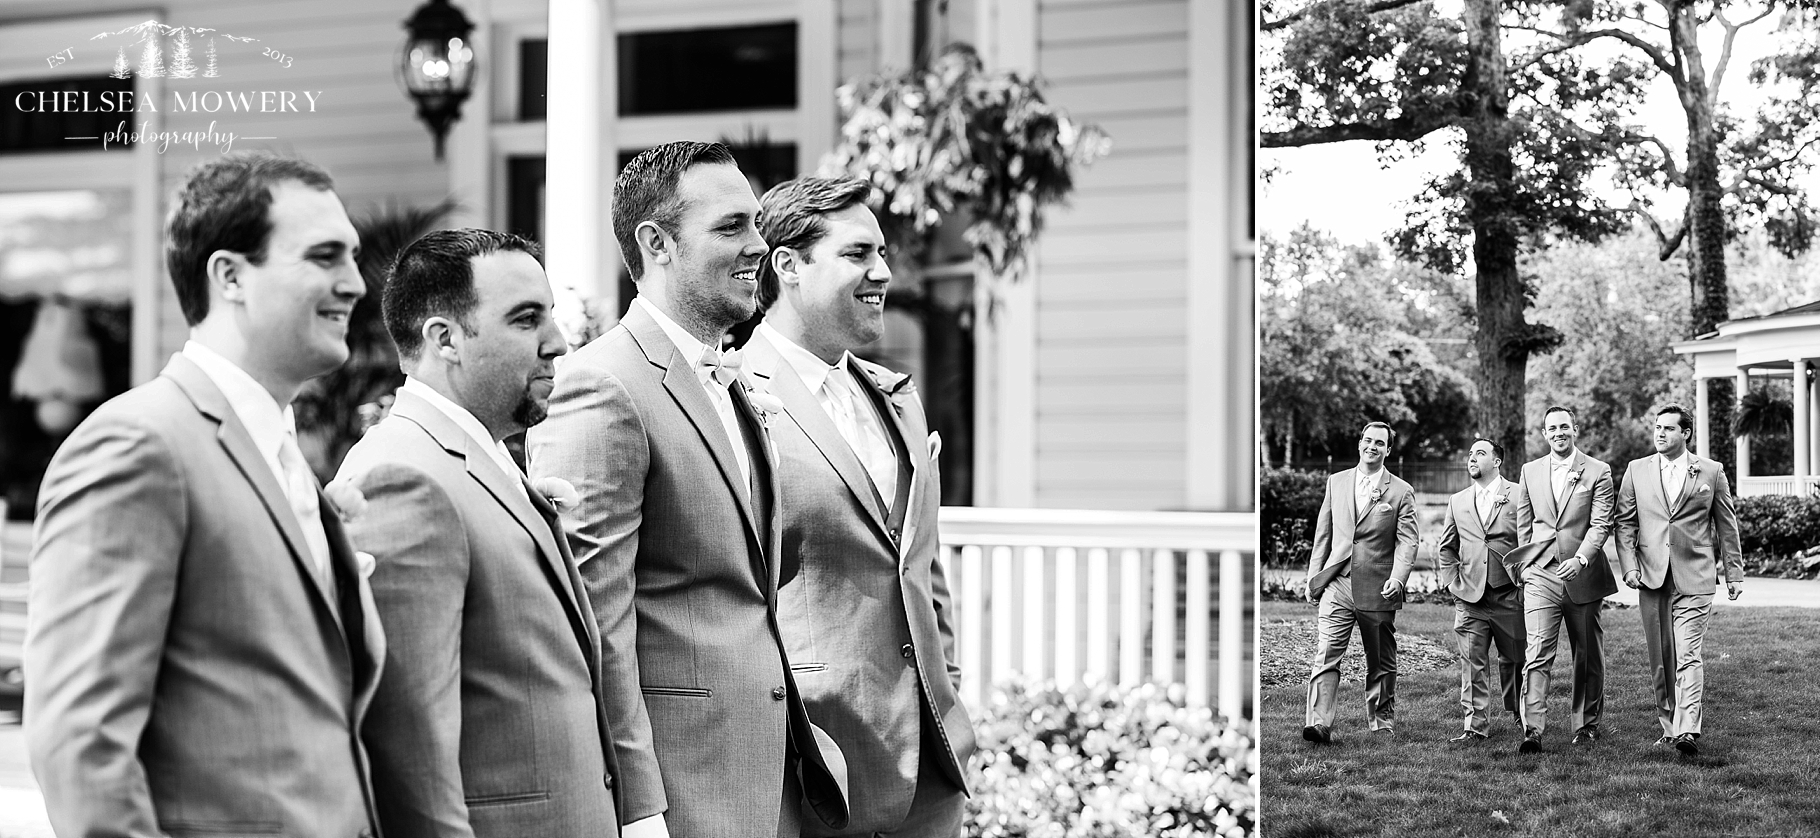 black and white photography | groomsmen portraits